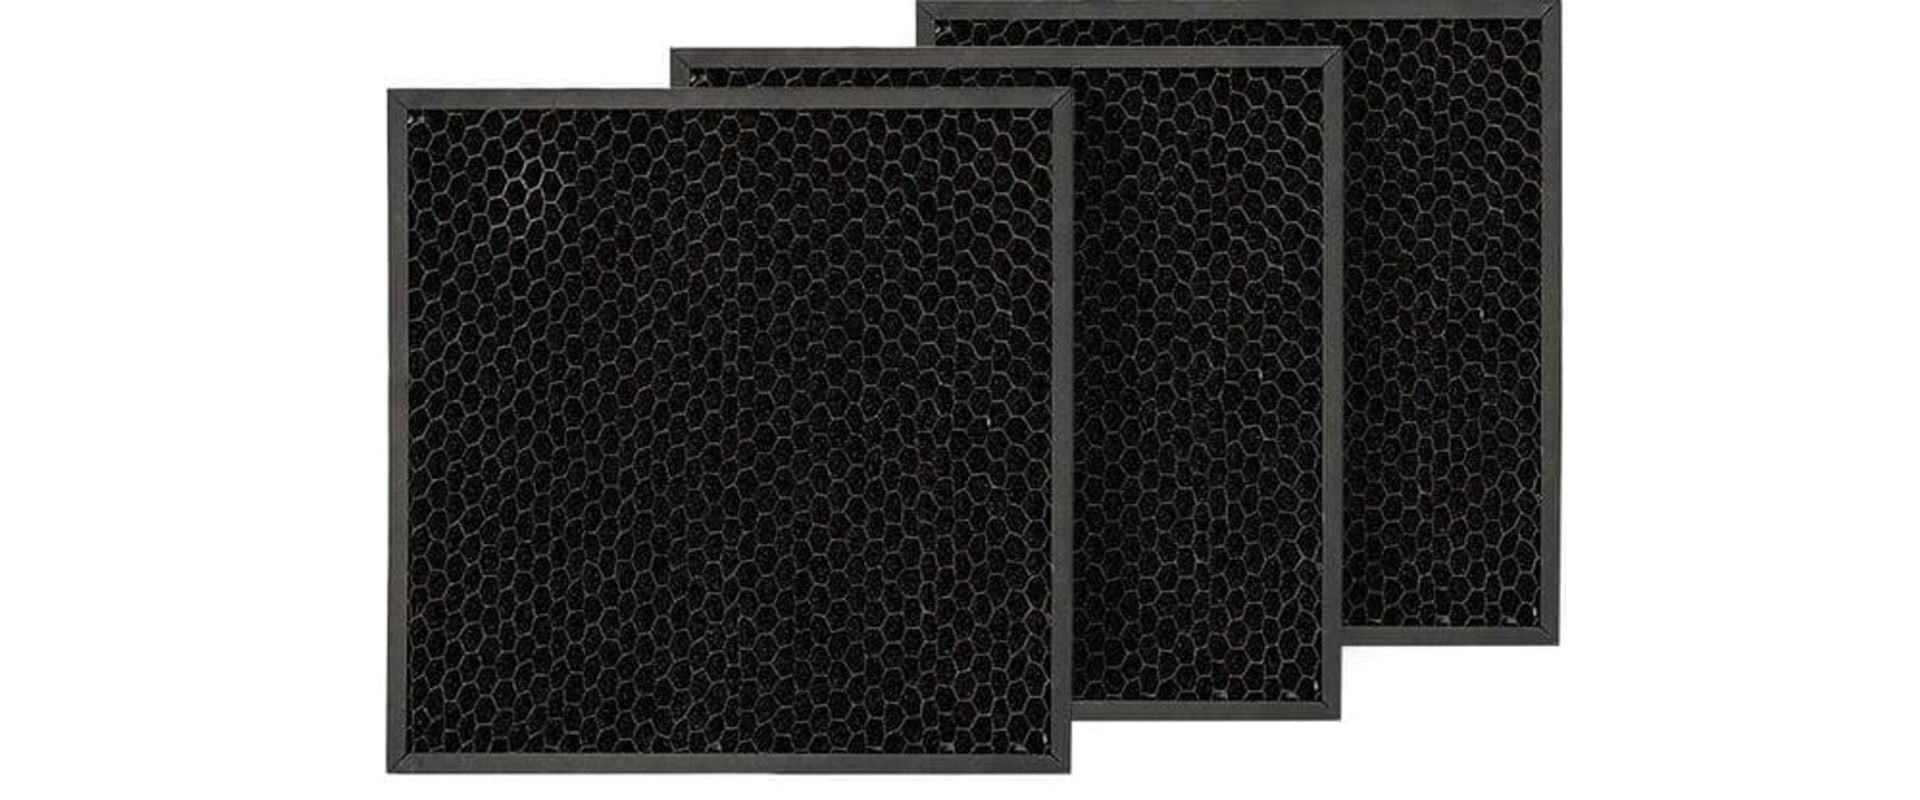 How to Find the Perfect Size Air Filter for Your System